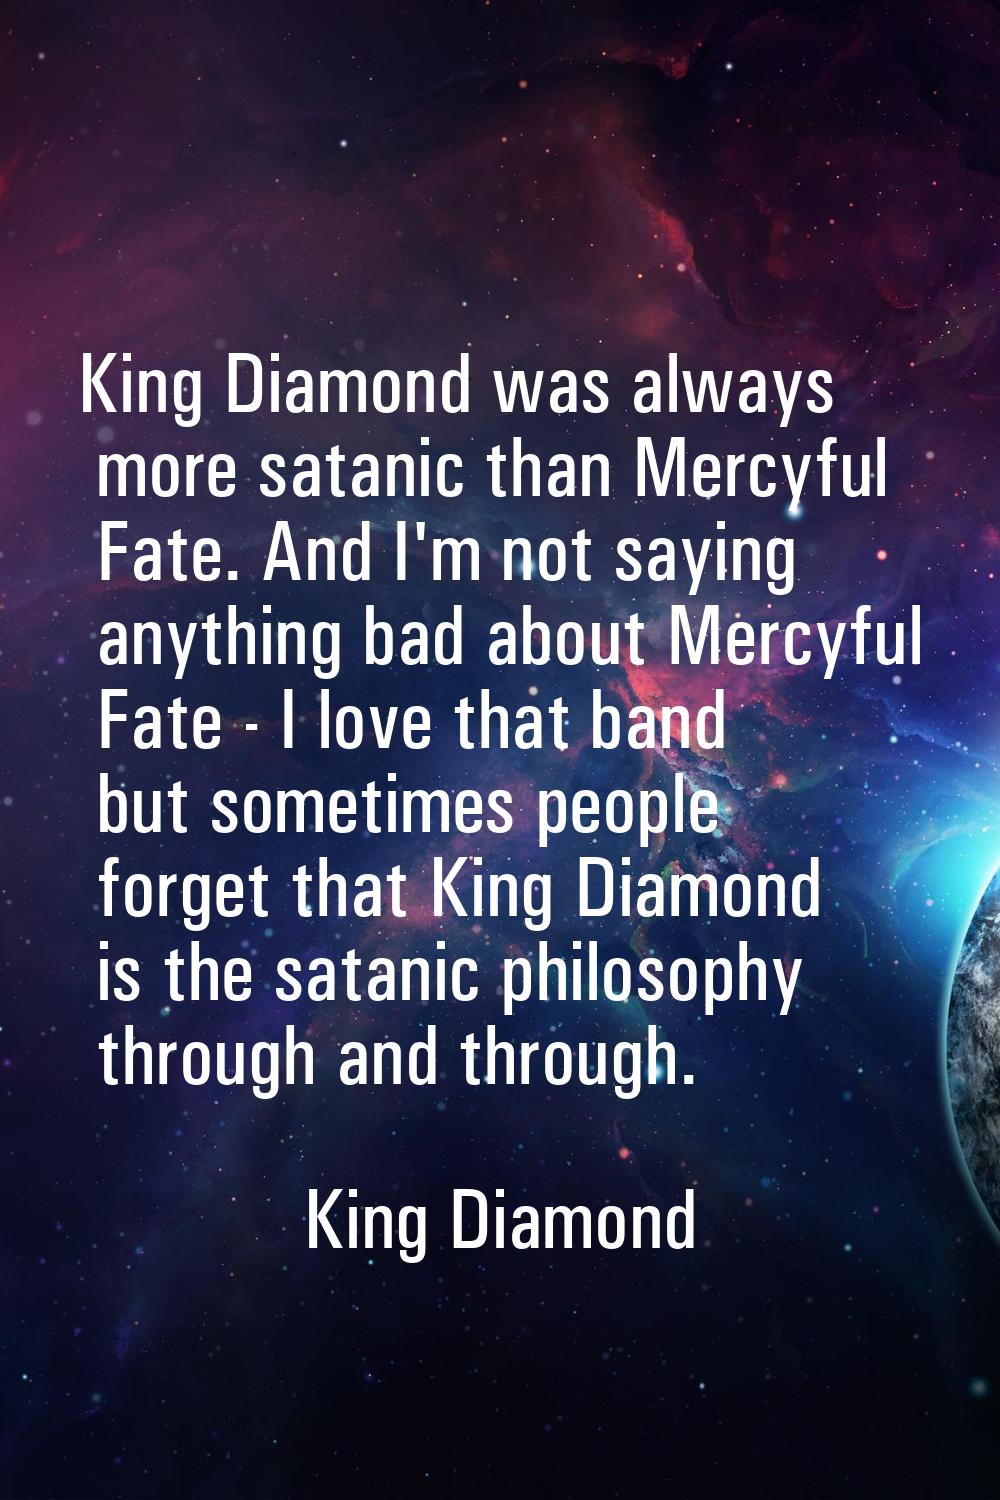 King Diamond was always more satanic than Mercyful Fate. And I'm not saying anything bad about Merc